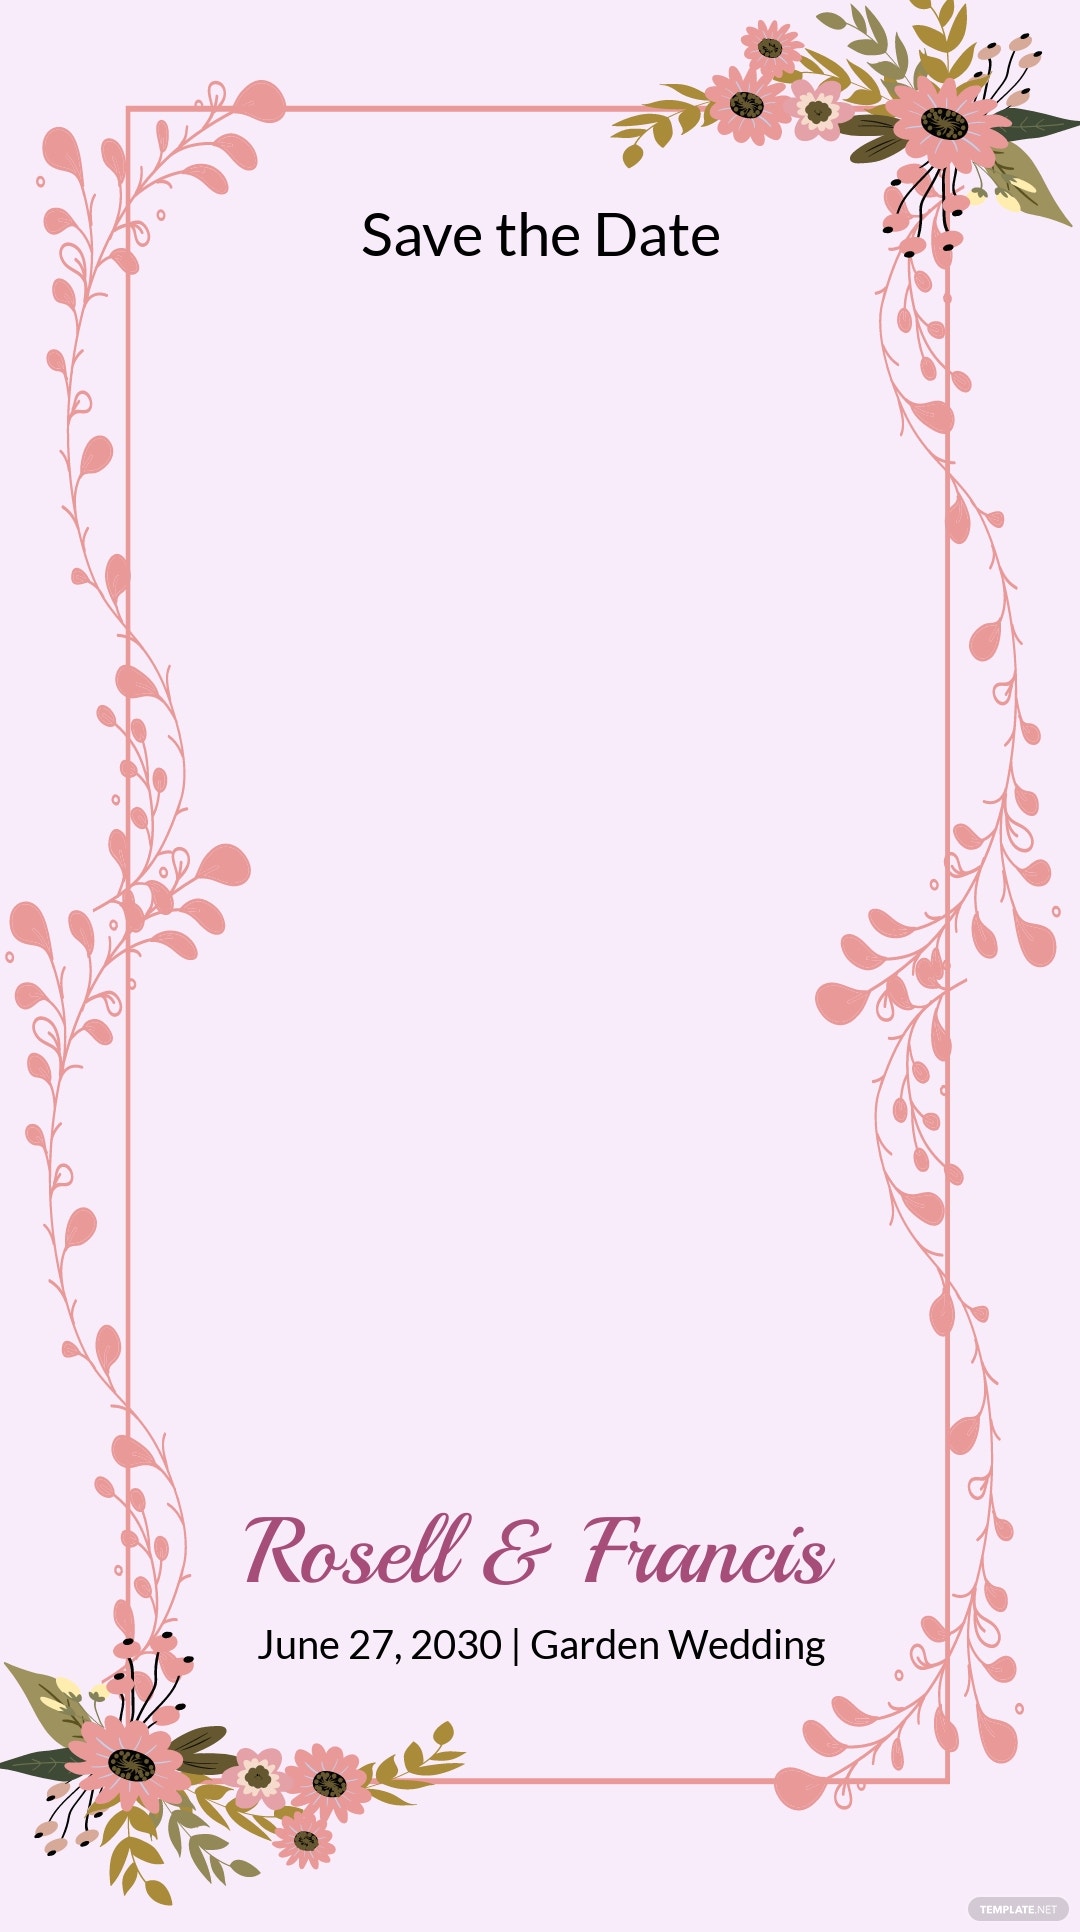 floral save the date snapchat geofilter template